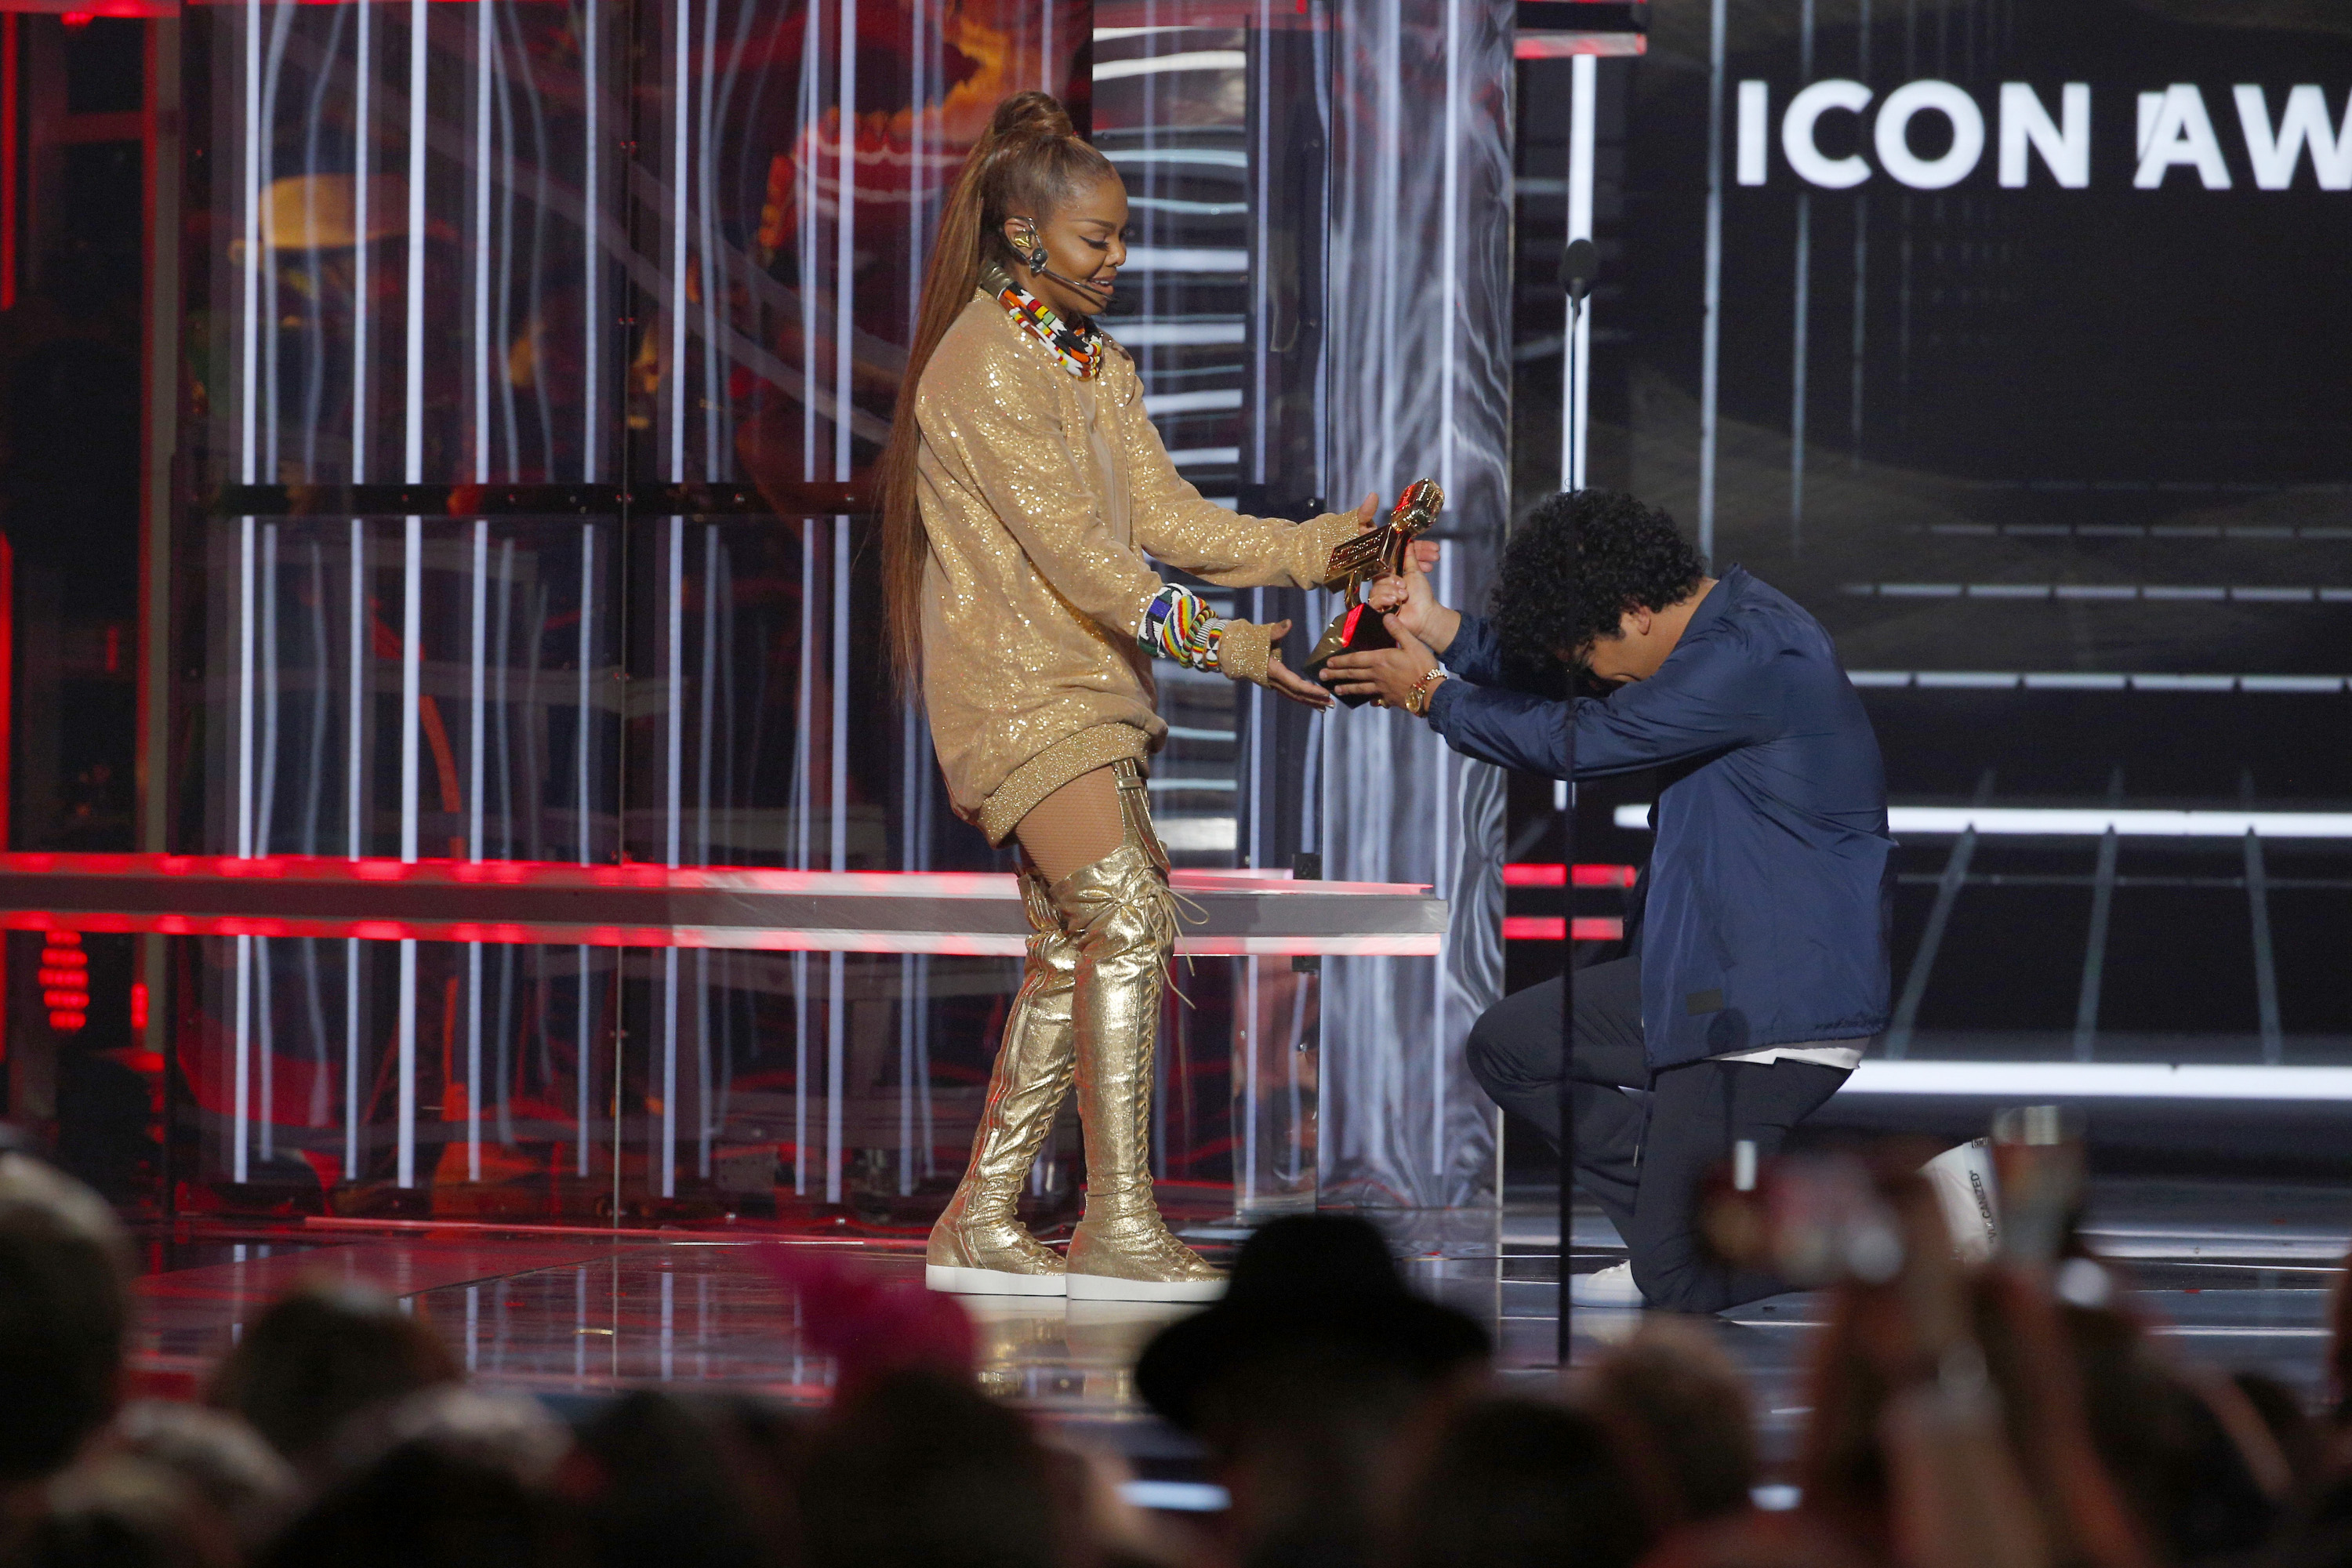 Janet Jackson and Bruno Mars at the Billboard Music Awards on May 20, 2018 | Source: Getty Images